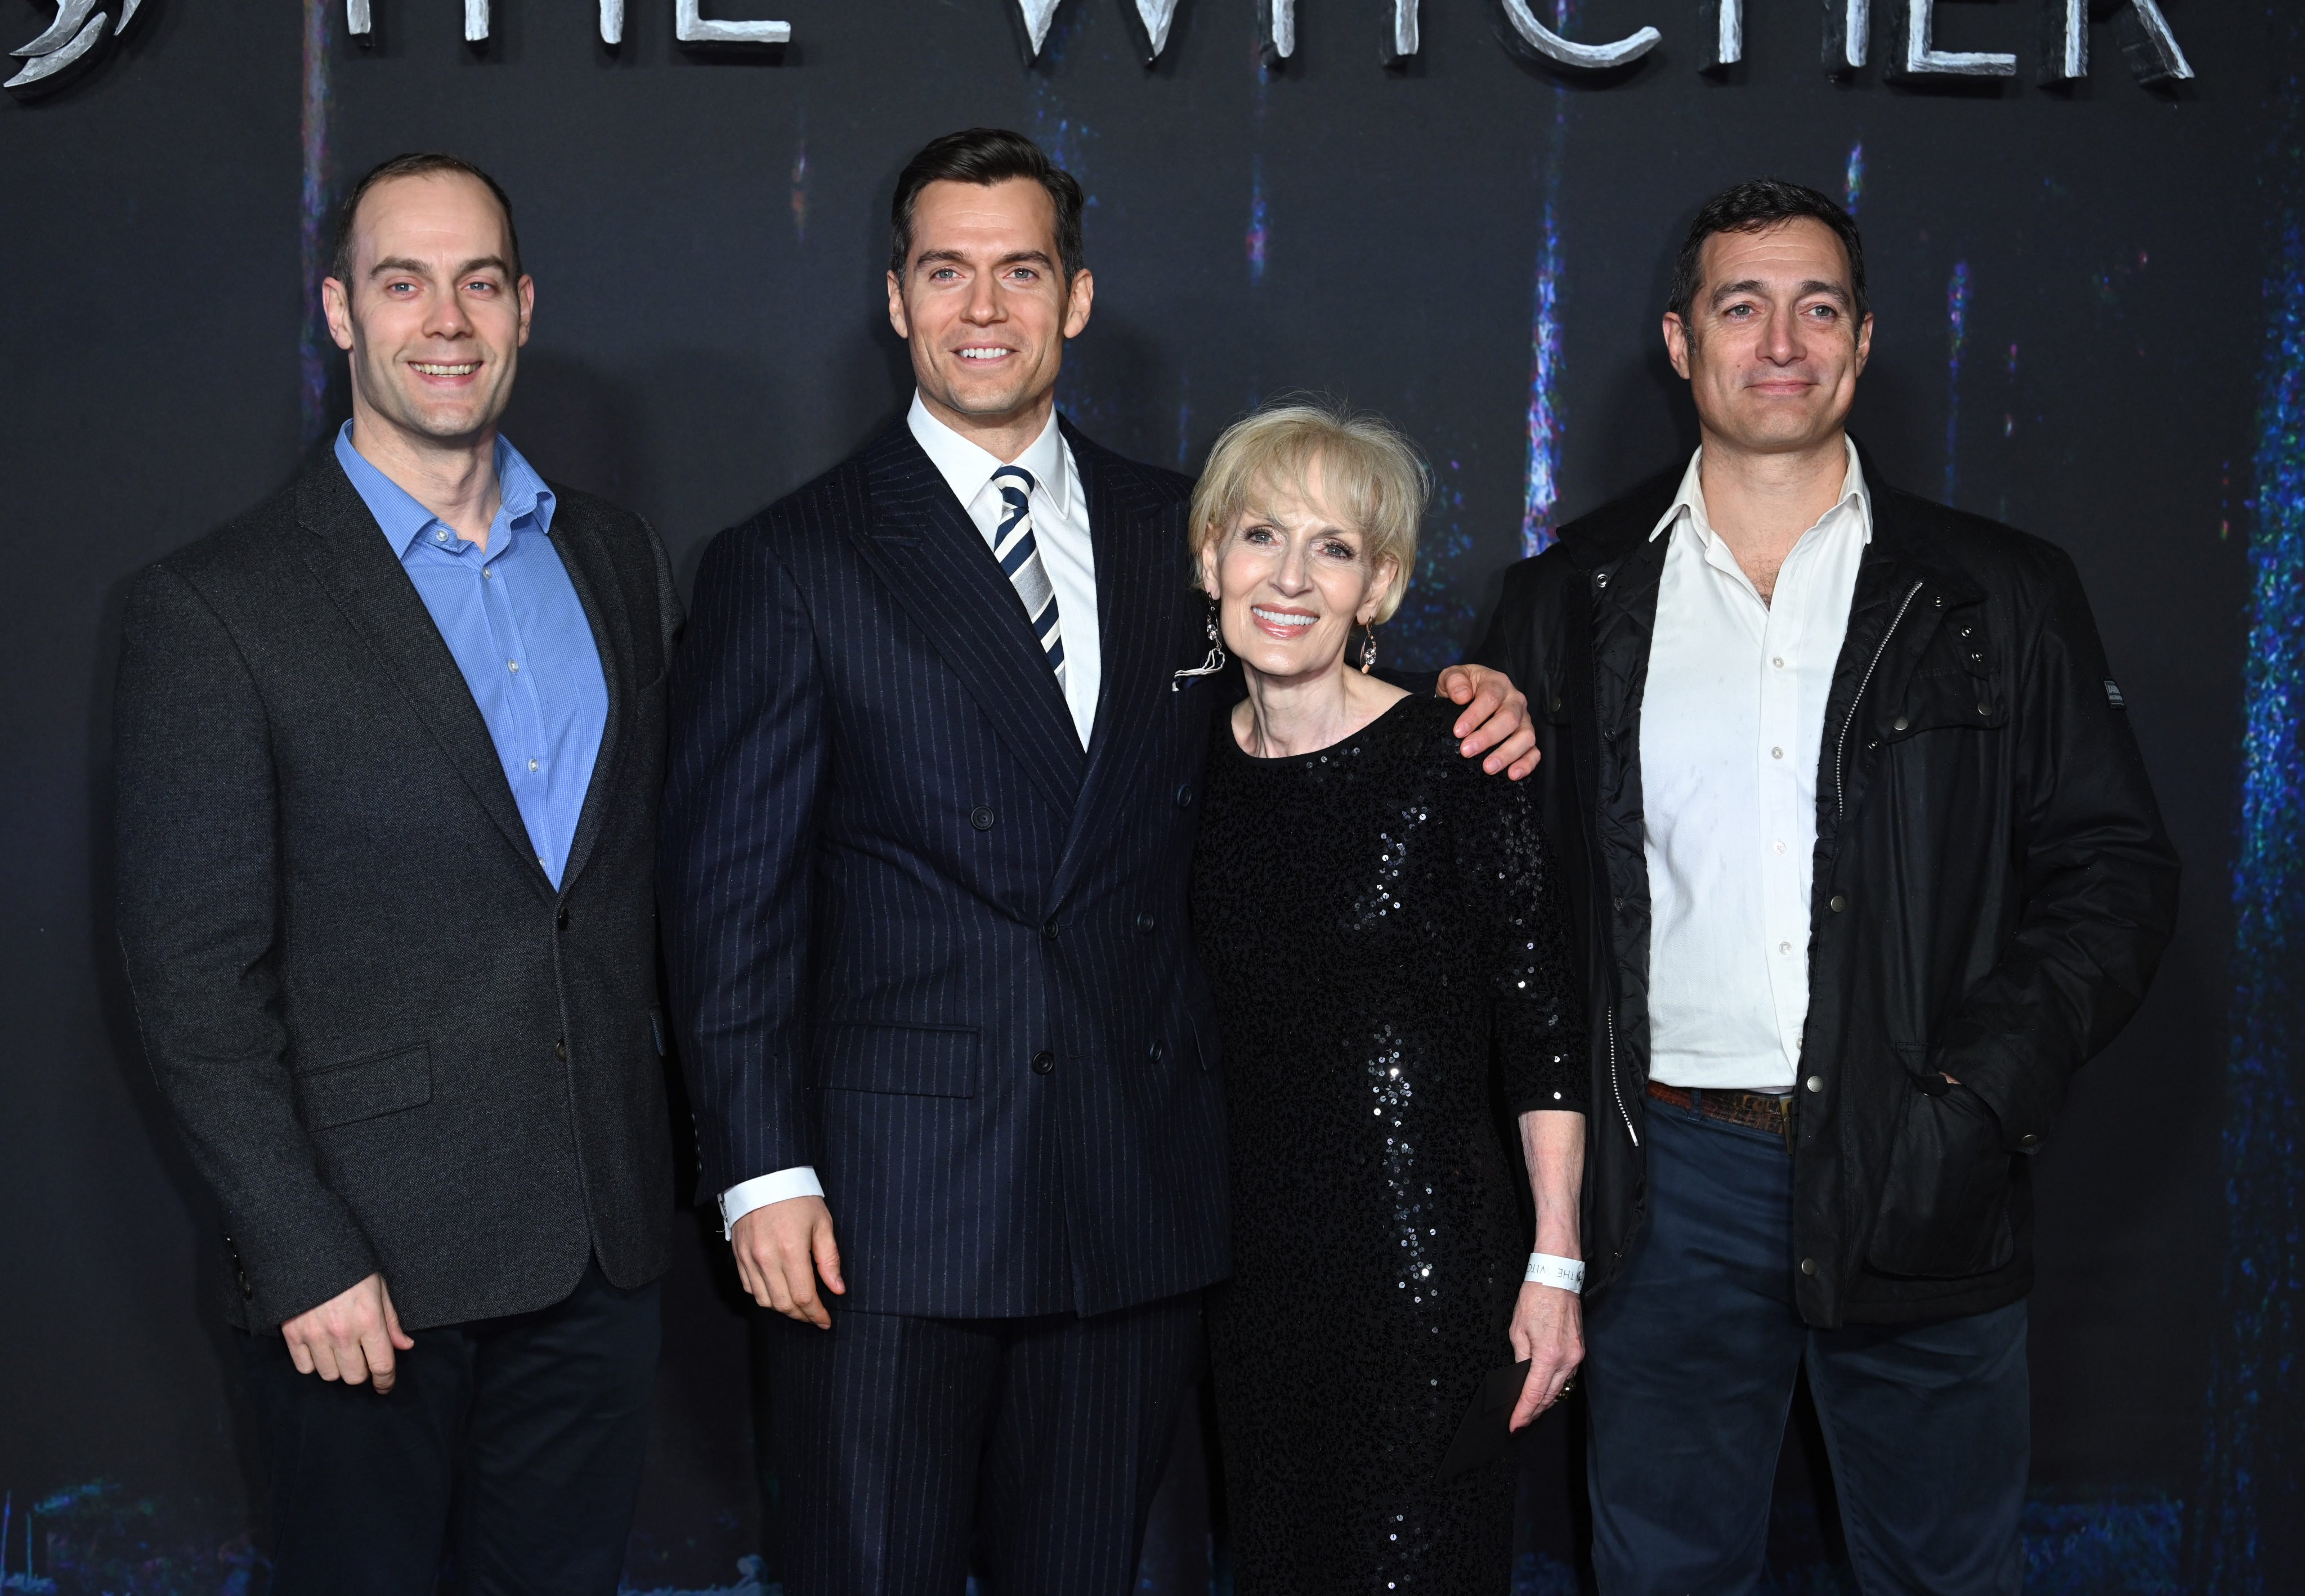 Henry Cavill (second from left) with mother Marianne Cavill (second from right) and their family attend the world premiere of The Witcher season two at Odeon Luxe Leicester Square in December 2021, in London, England. Photo: WireImage